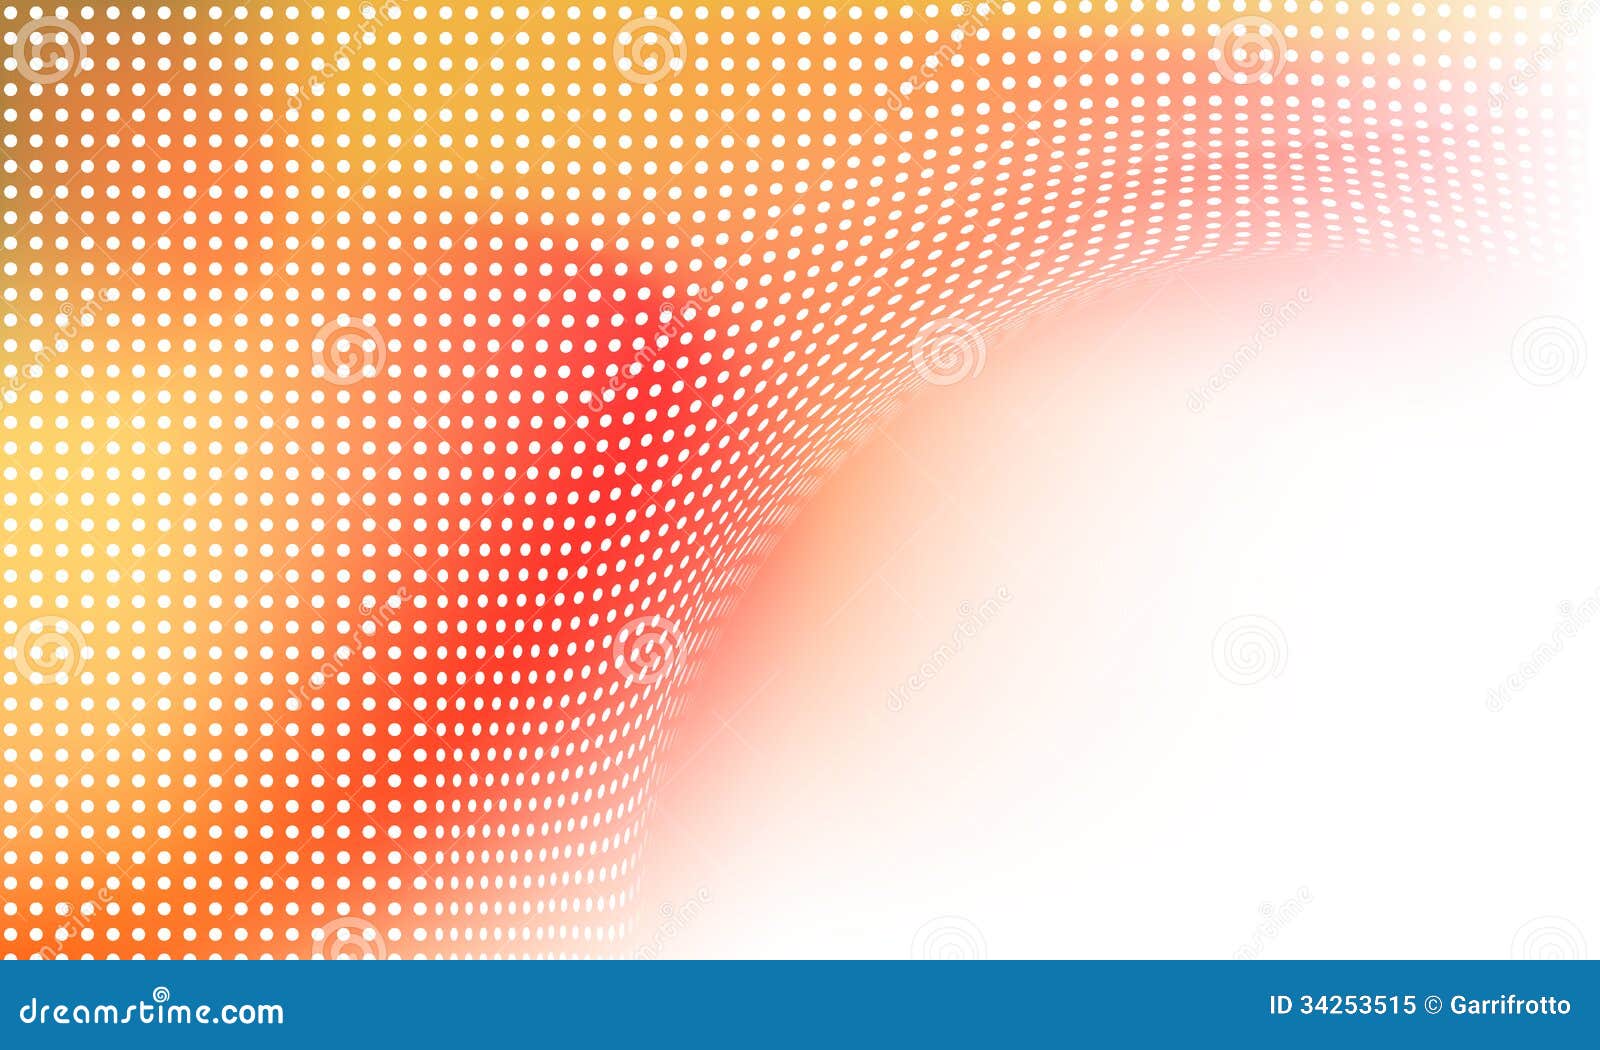 Vector Abstract Backround Stock Vector Illustration Of Smooth 34253515